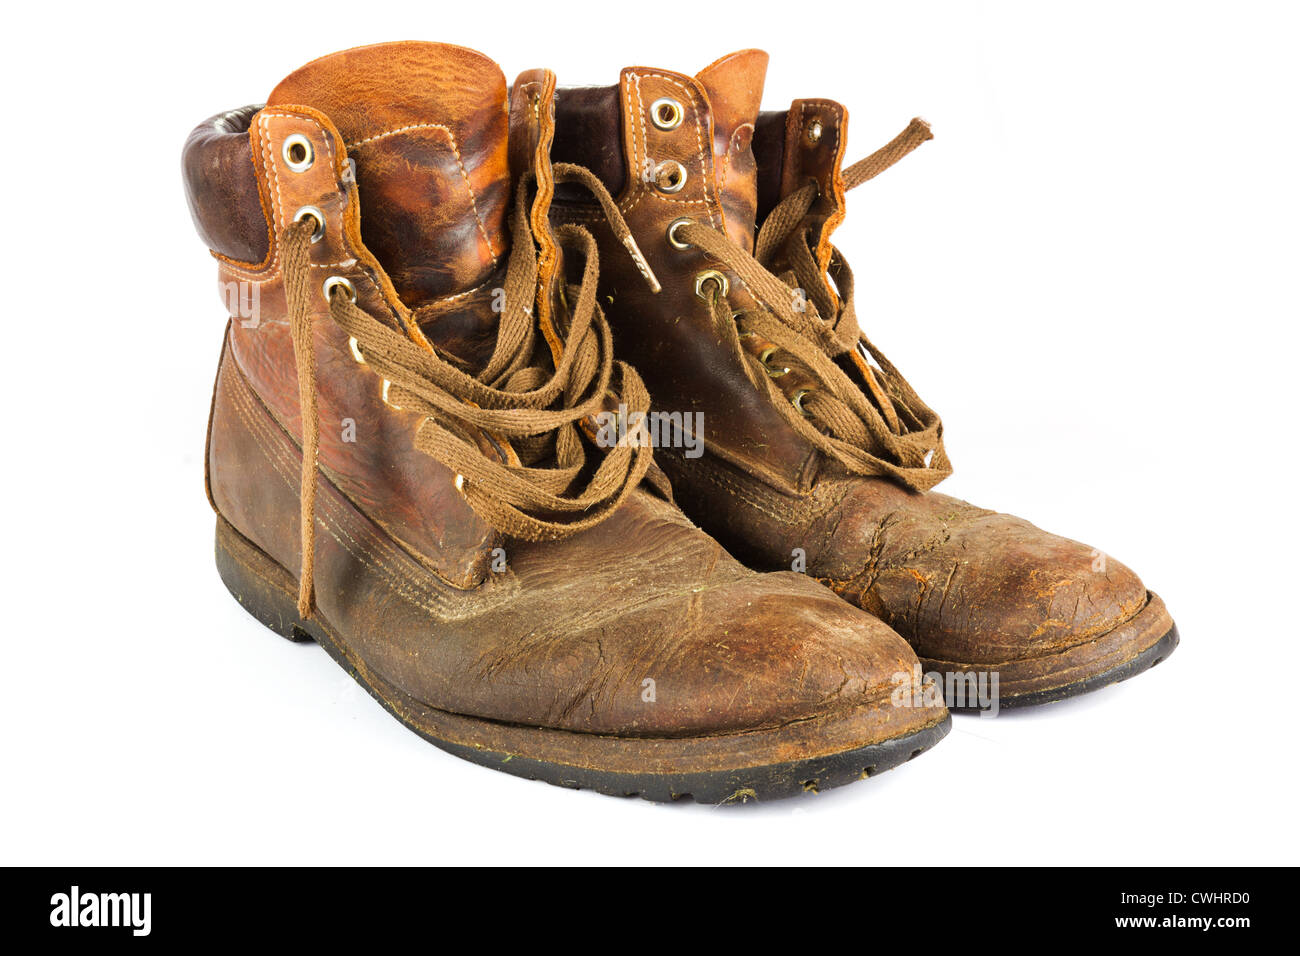 Pair of old worn brown leather work boots on white Stock Photo